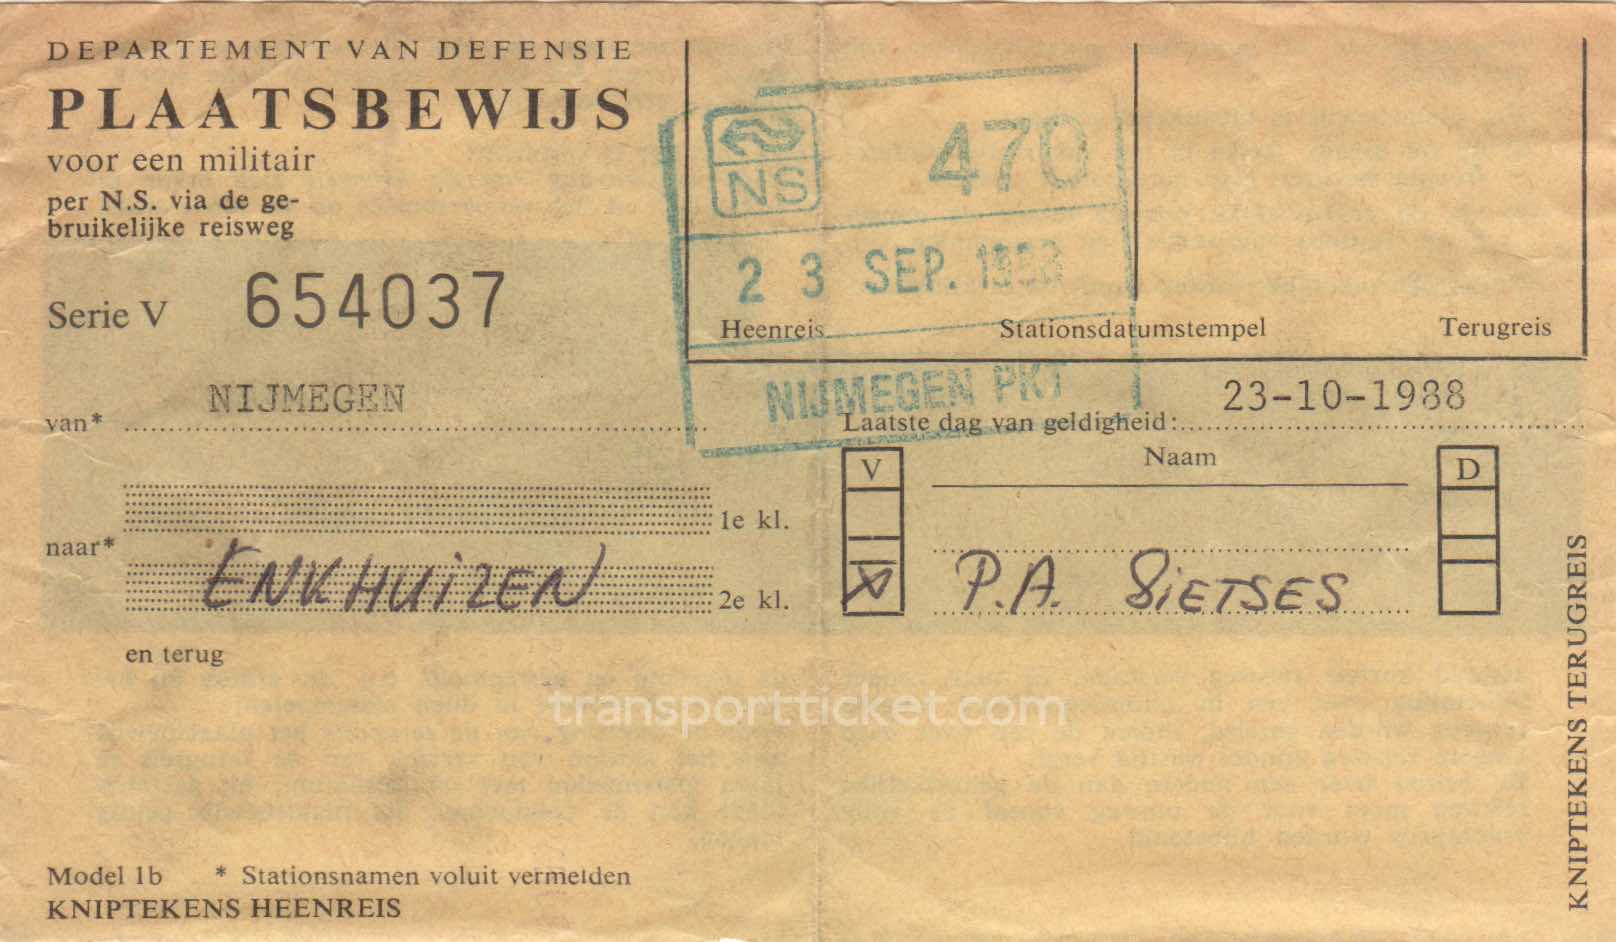 transport ticket issued by Dutch Department of Defense (1988)